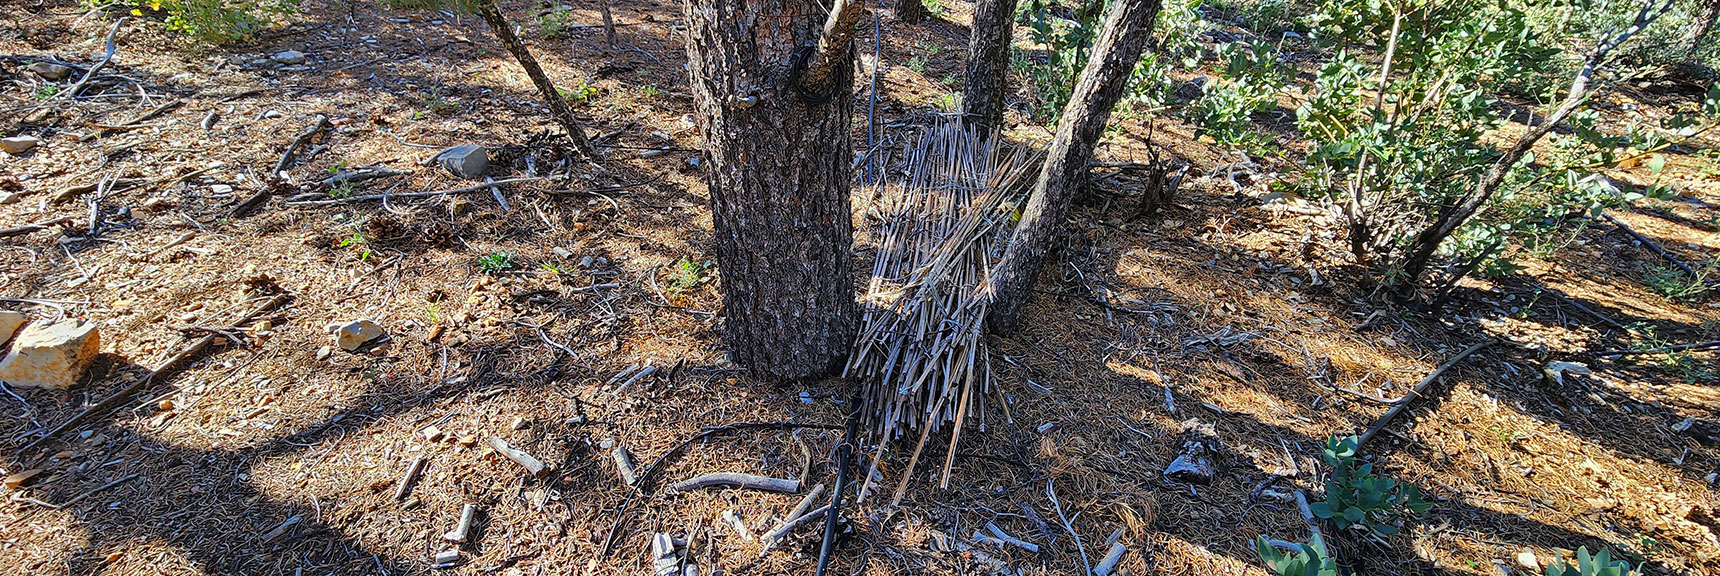 Netted Bamboo Plant Stakes. System Appeared Abandoned for Around 20+ Years | Switchback Spring Pinnacle | Wilson Ridge | Lovell Canyon, Nevada